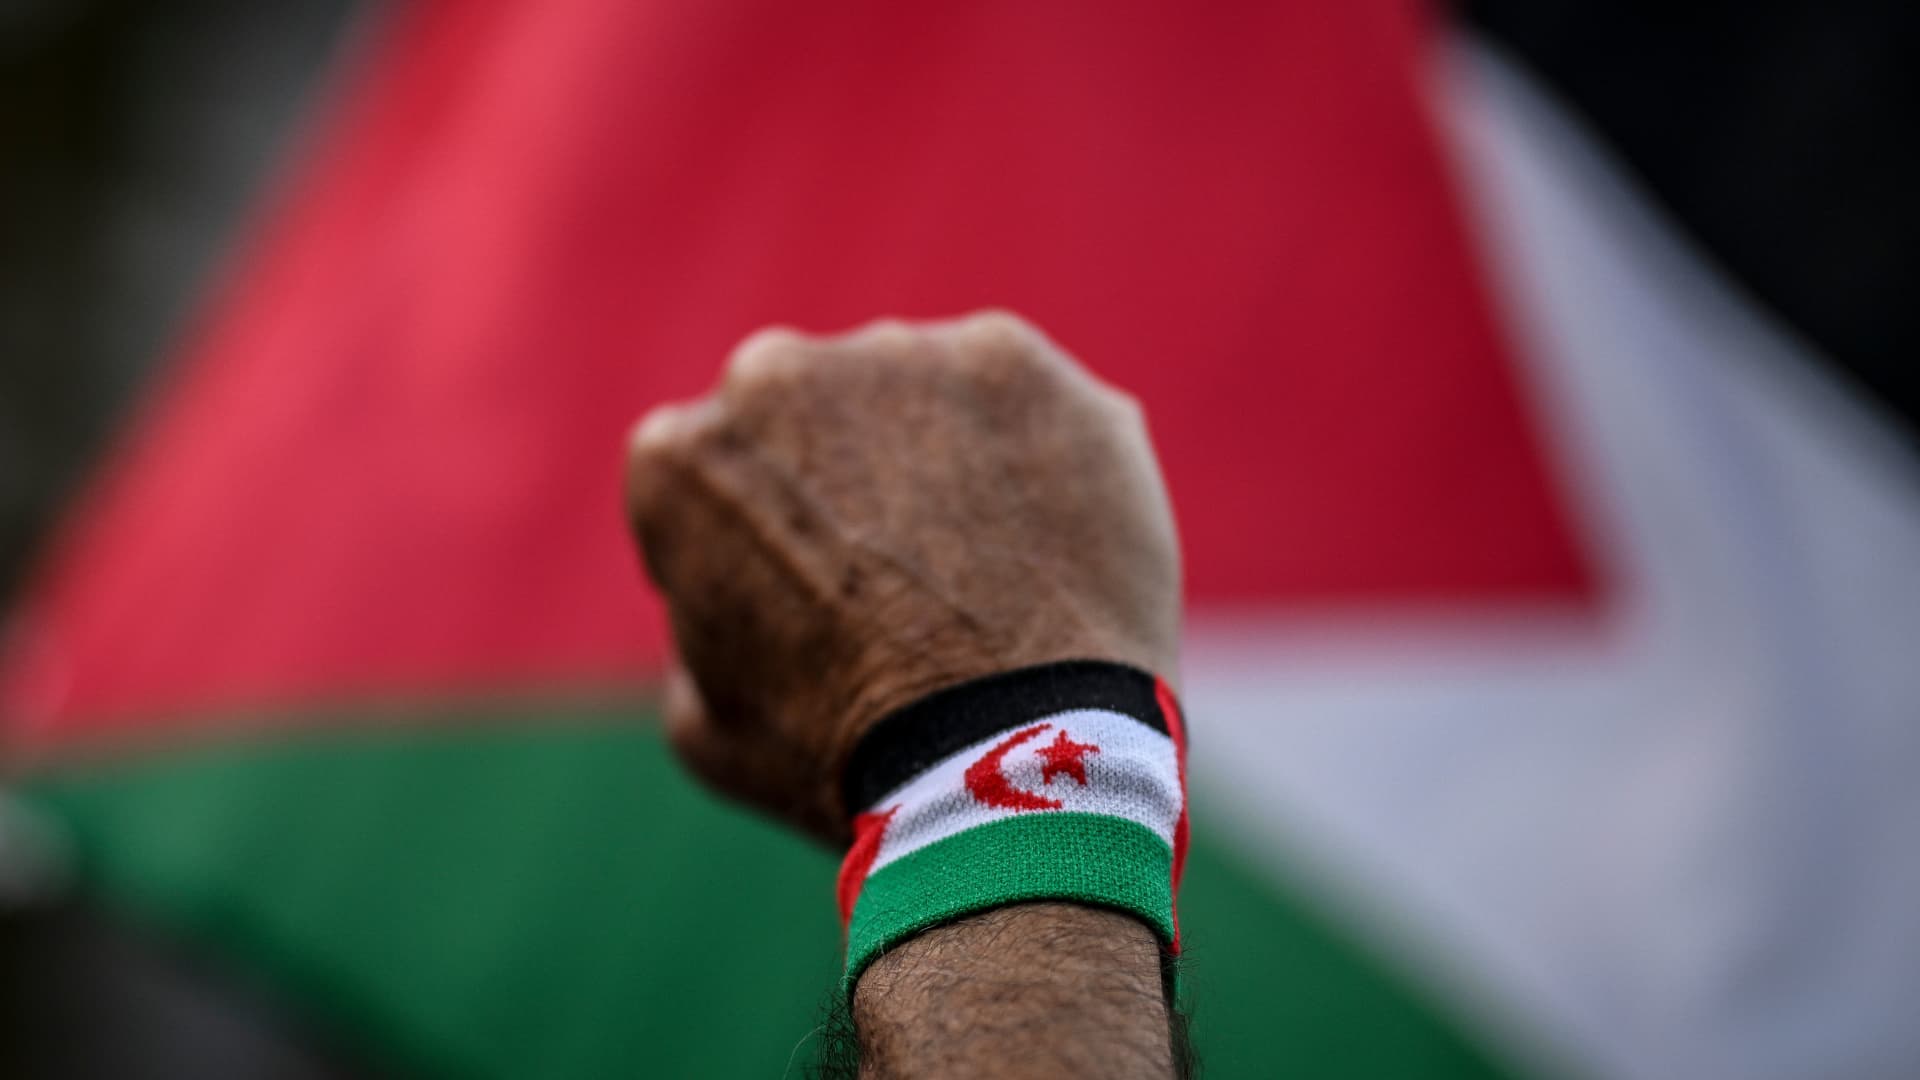 A protestor lifts his fist during a rally in support of Palestinians at Camoes square in Lisbon on October 9, 2023 after the Palestinian militant group Hamas launched an attack on Israel.